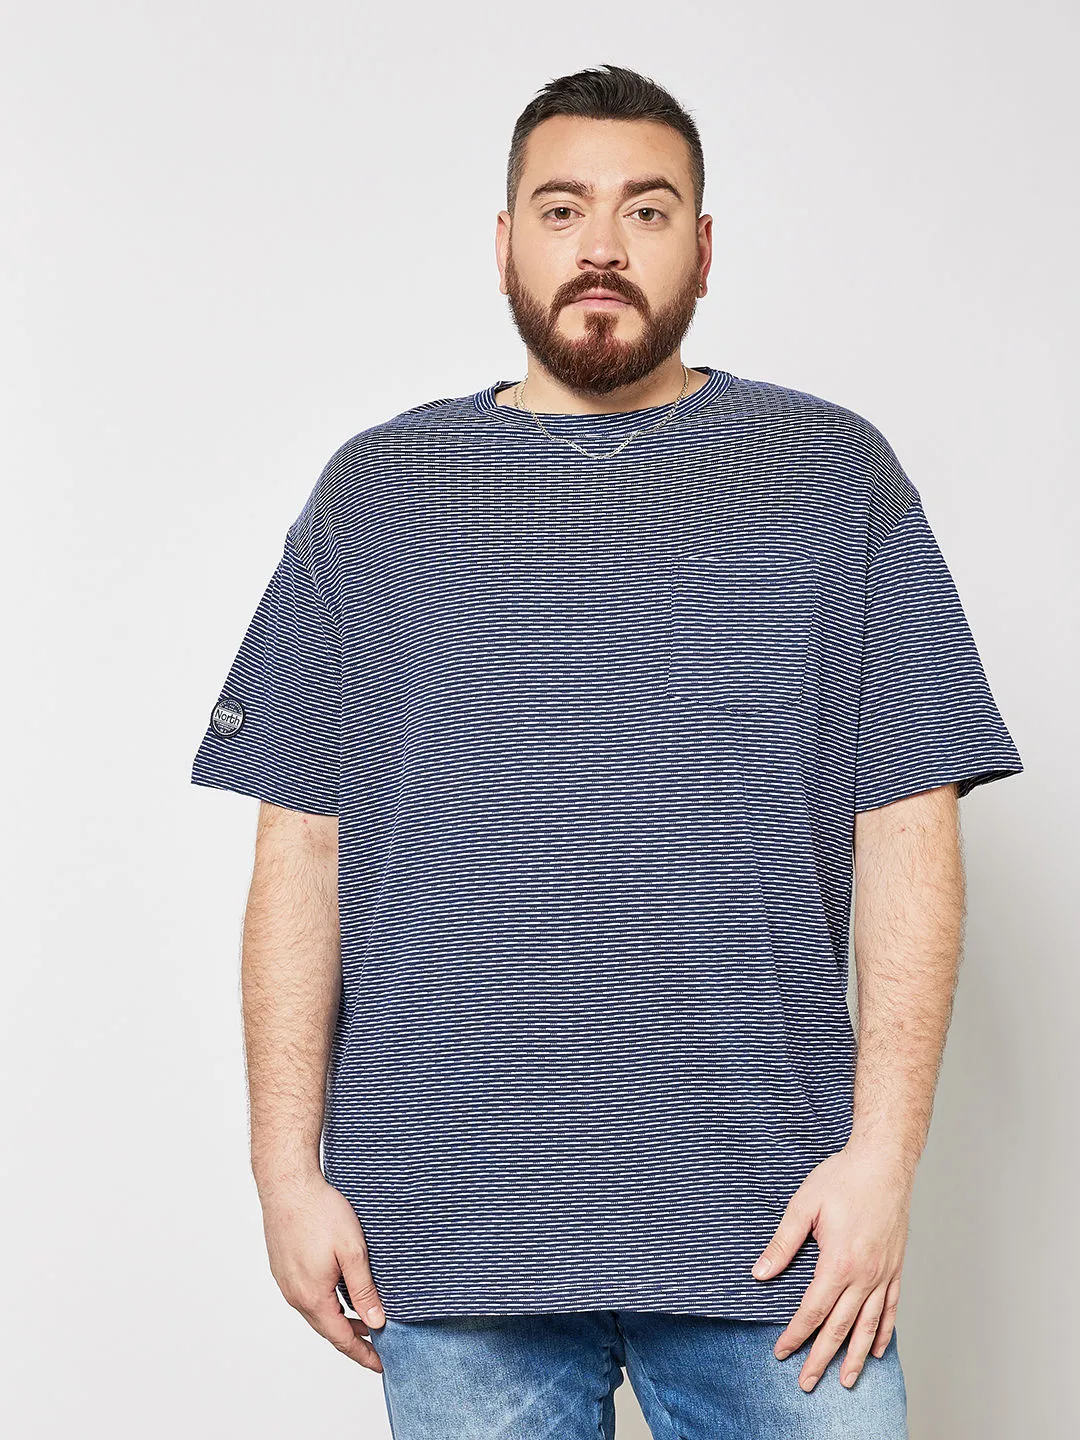 North 56°4 Plus Size Printed Crew Neck T-Shirt Navy